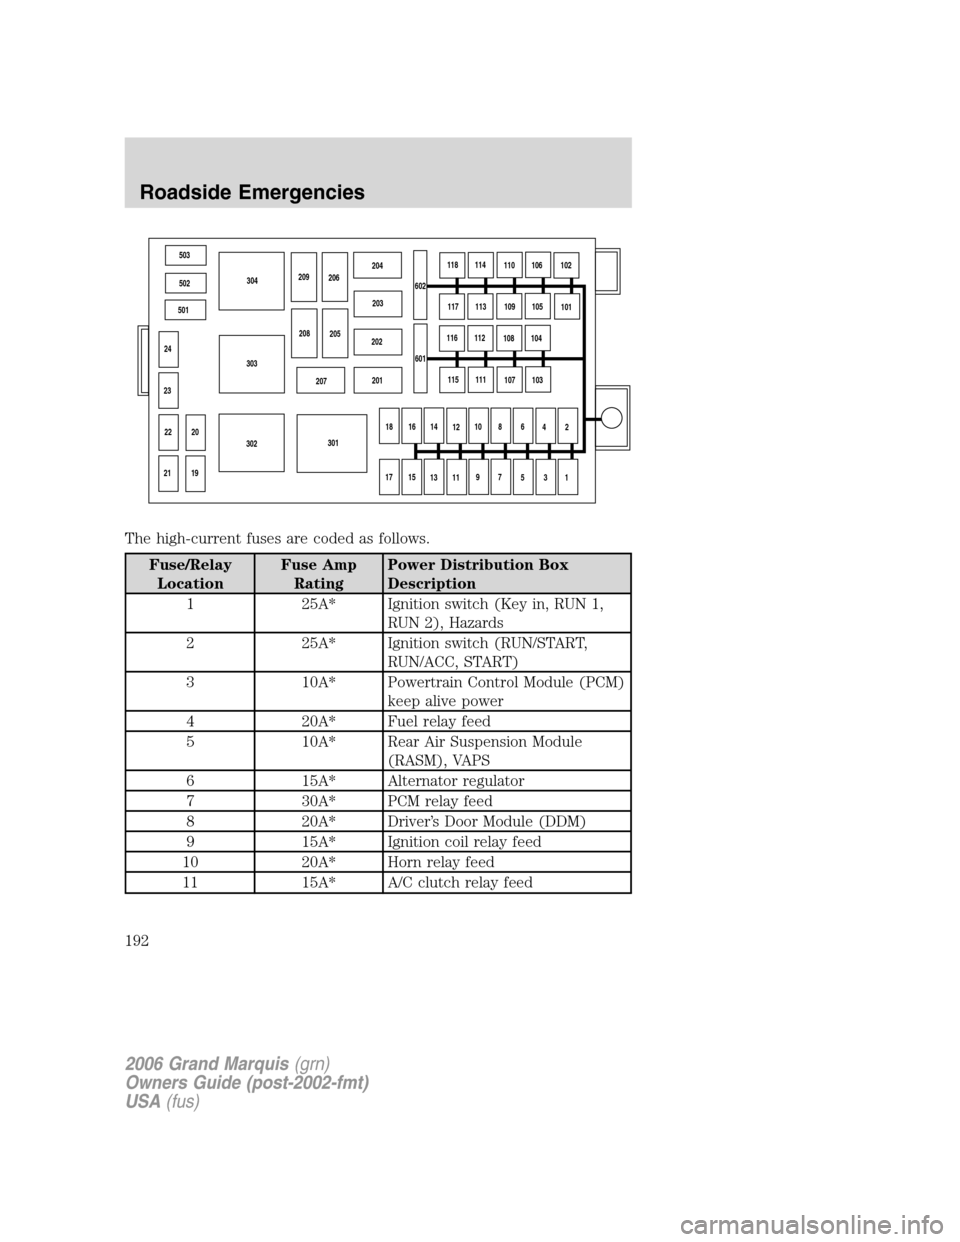 Mercury Grand Marquis 2006  Owners Manuals The high-current fuses are coded as follows.
Fuse/Relay
LocationFuse Amp
RatingPower Distribution Box
Description
1 25A* Ignition switch (Key in, RUN 1,
RUN 2), Hazards
2 25A* Ignition switch (RUN/STA